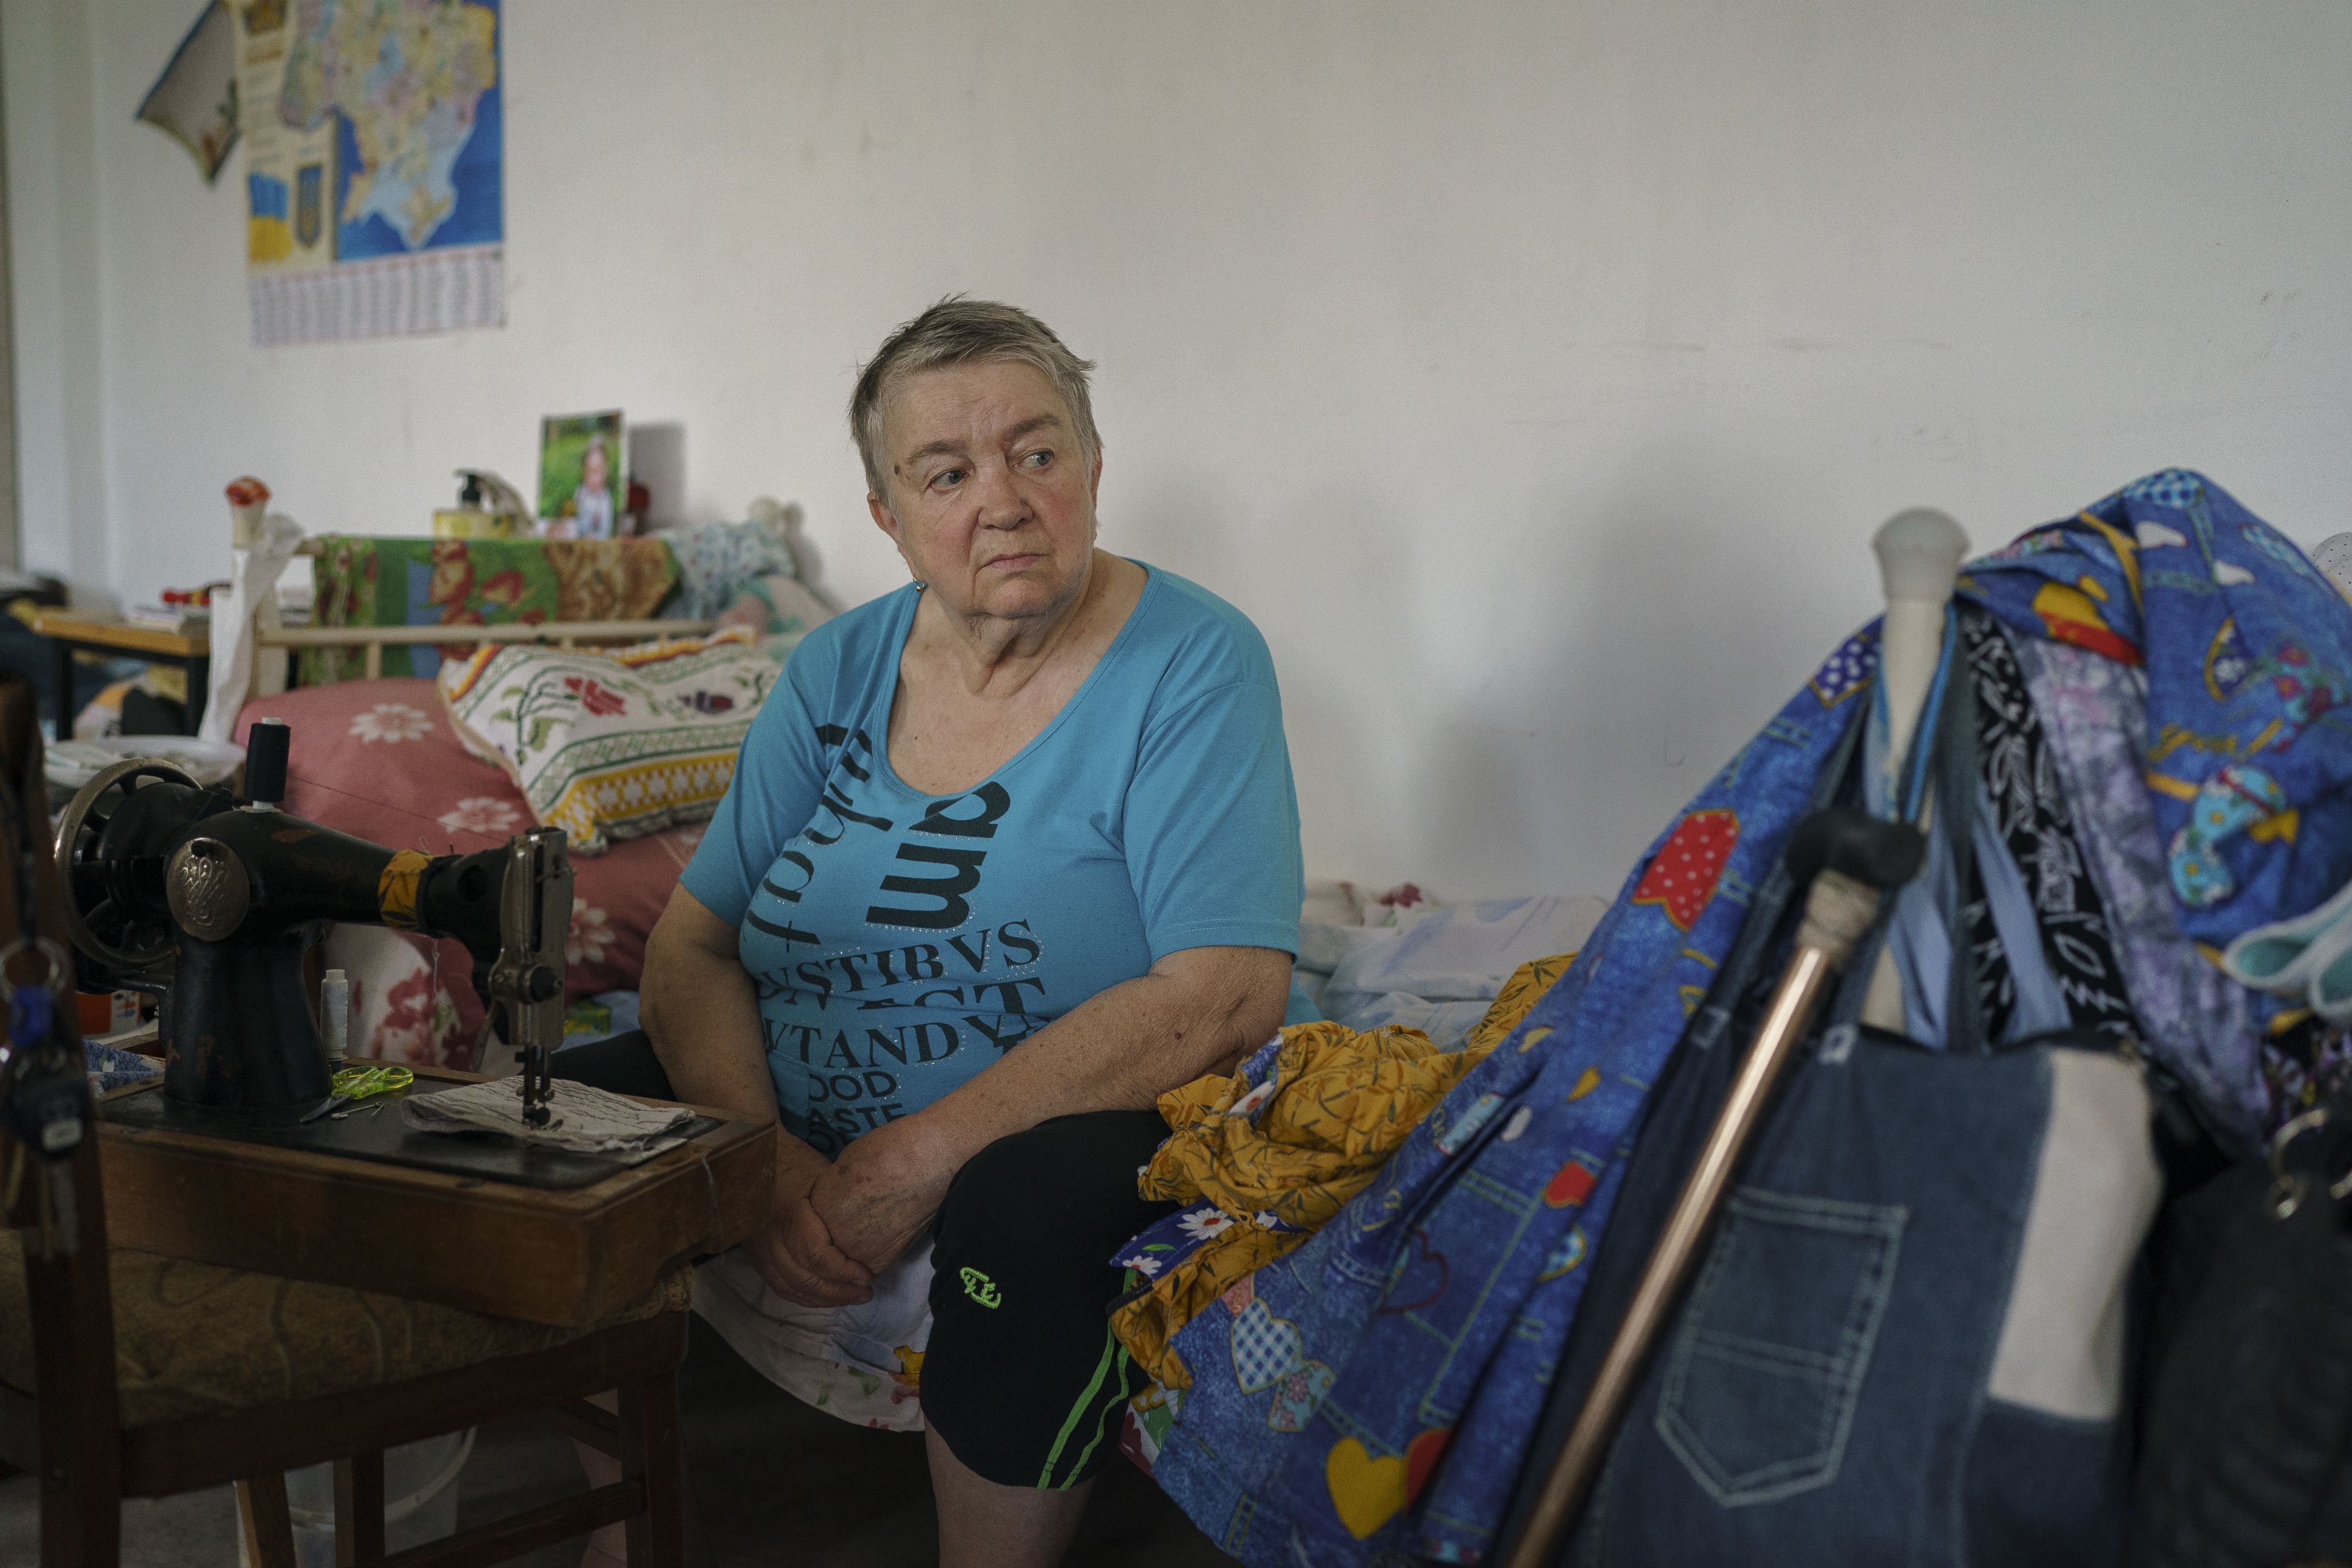 Older Ukranian woman, Lyubov, sits with a pensive expression